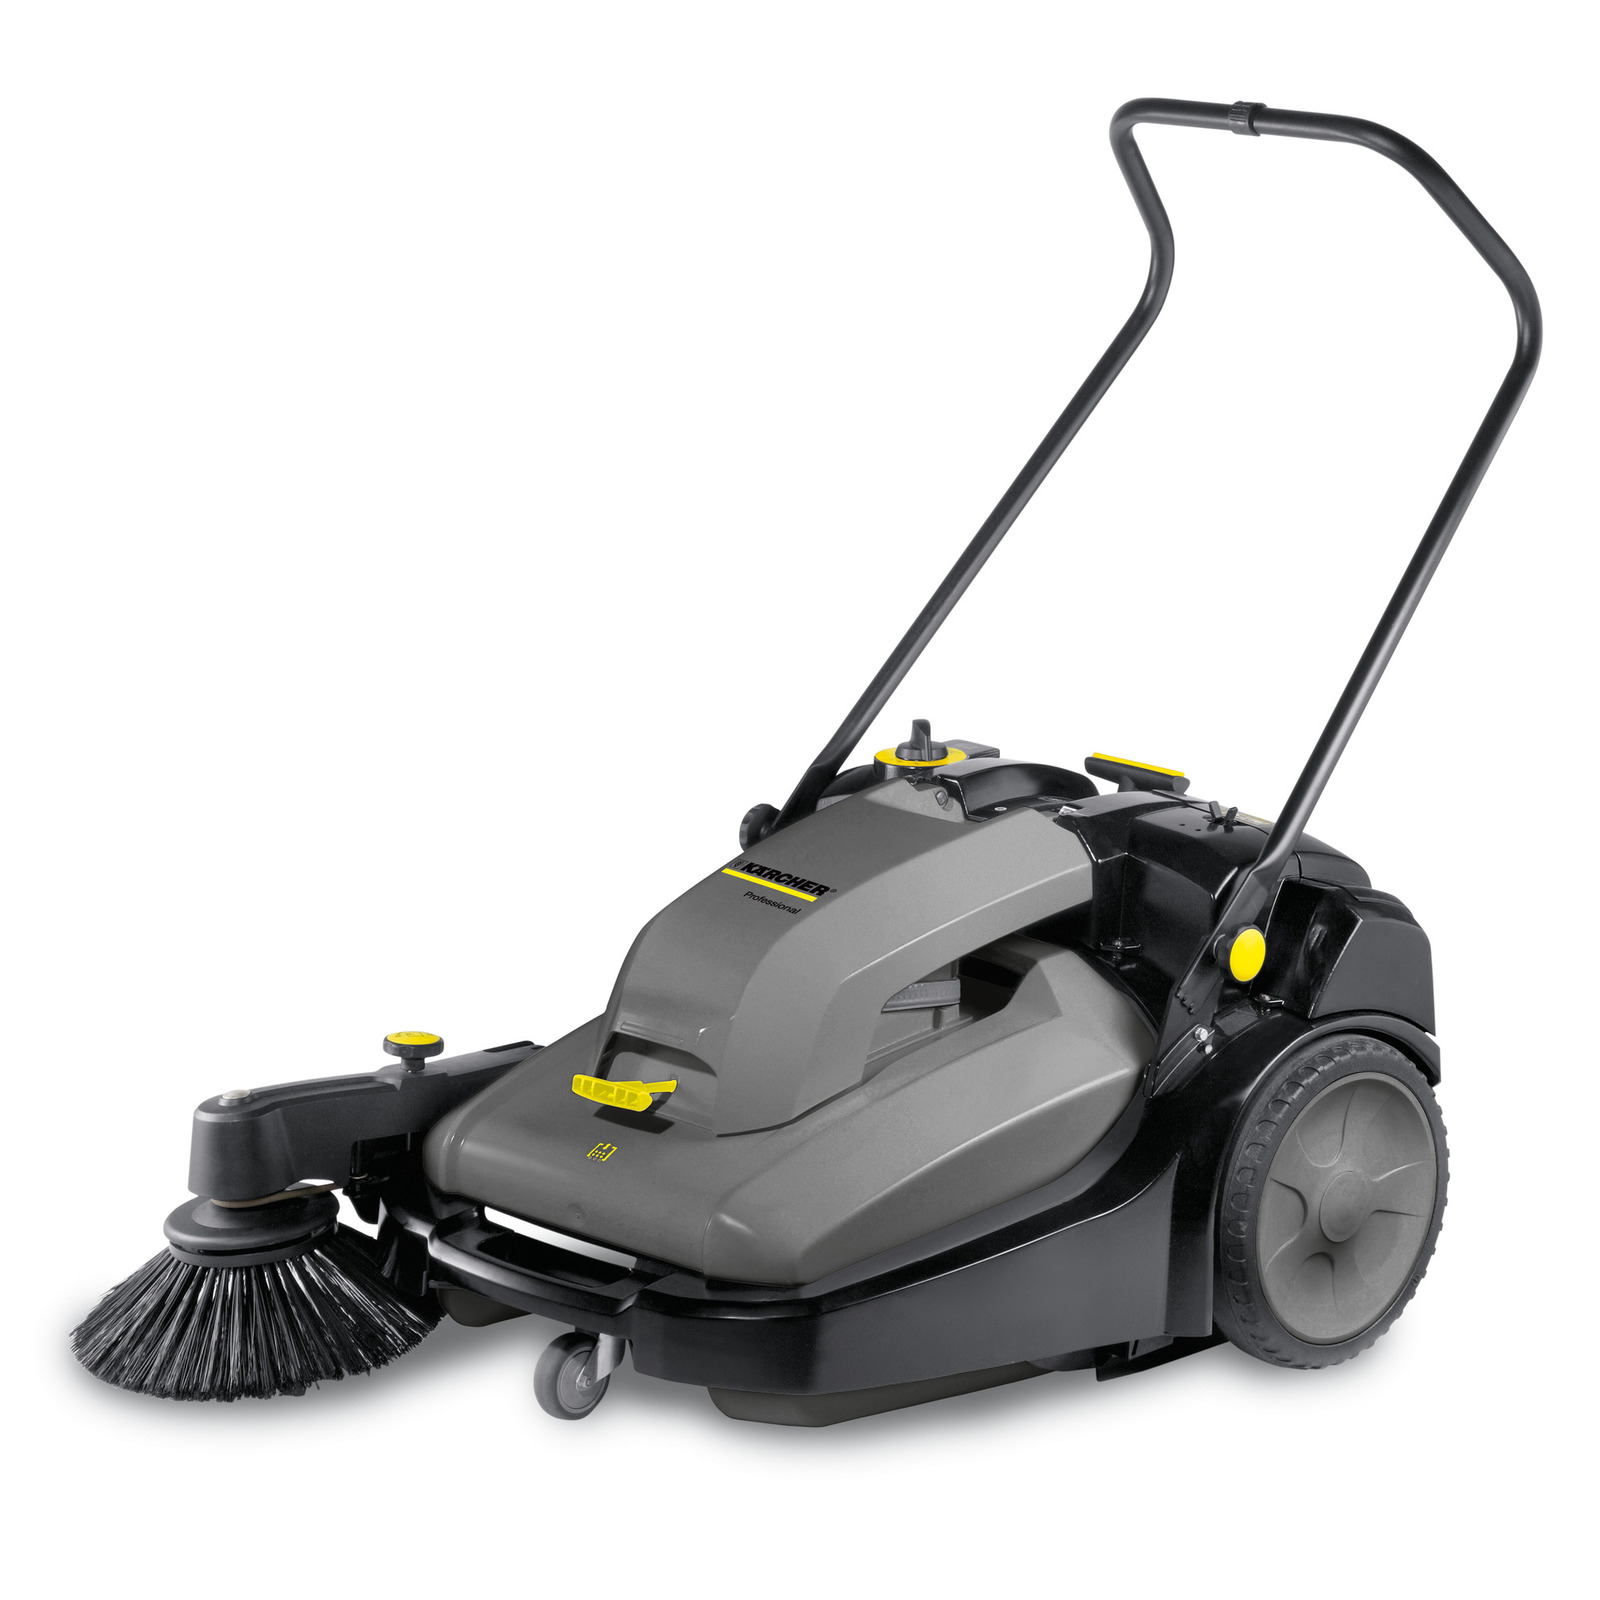 KM 70/30 C Bp Adv walk-behind sweeper with dust control 28in